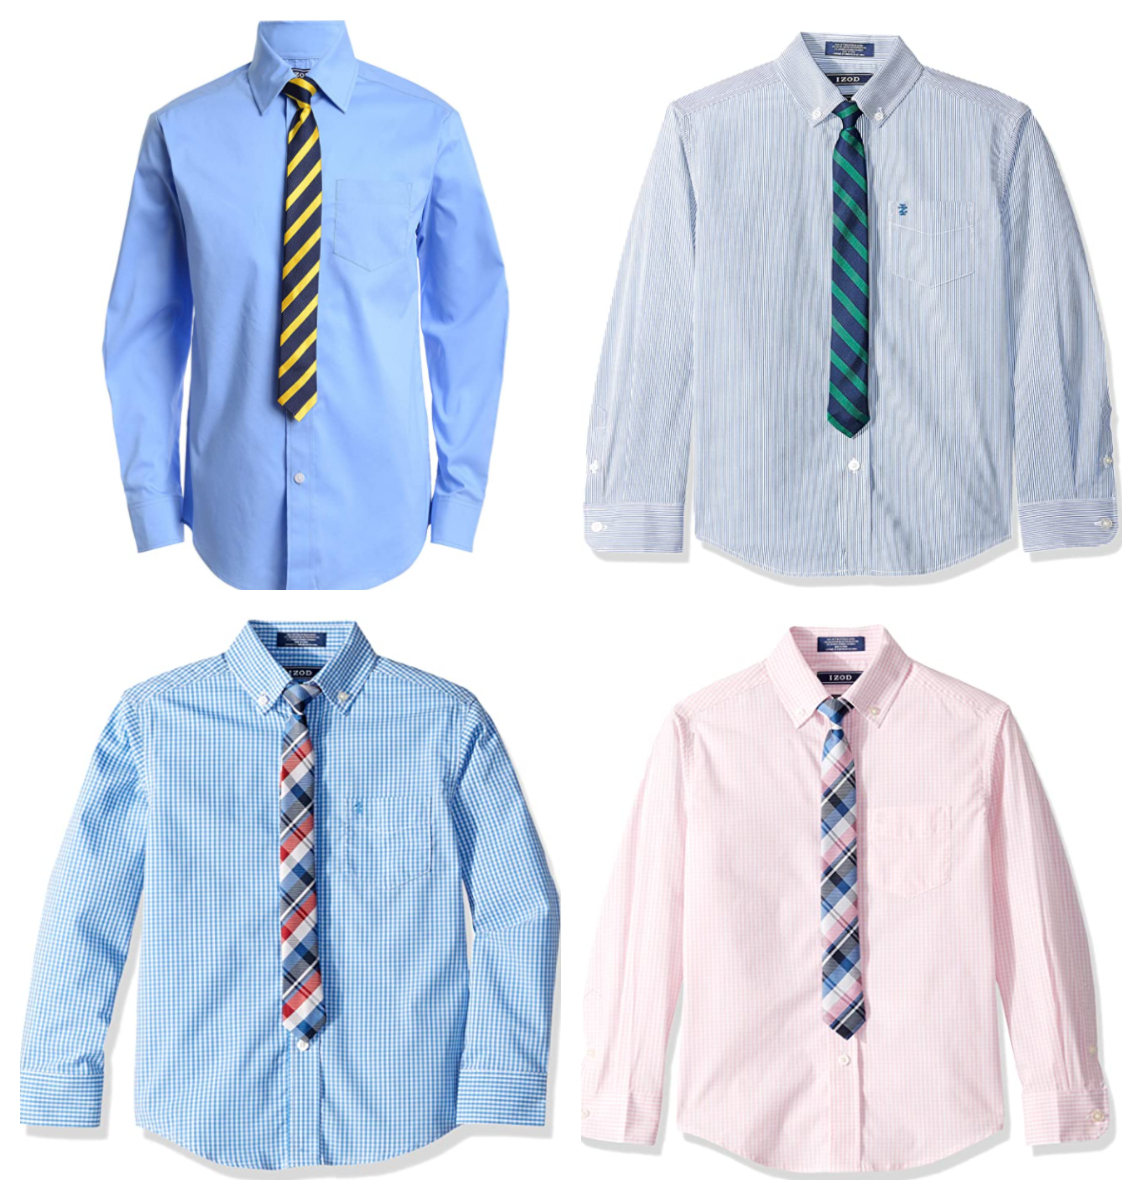 Izod Boys’ Long Sleeve Dress Shirt with Tie for ONLY $10.80-$12.60 (Was ...